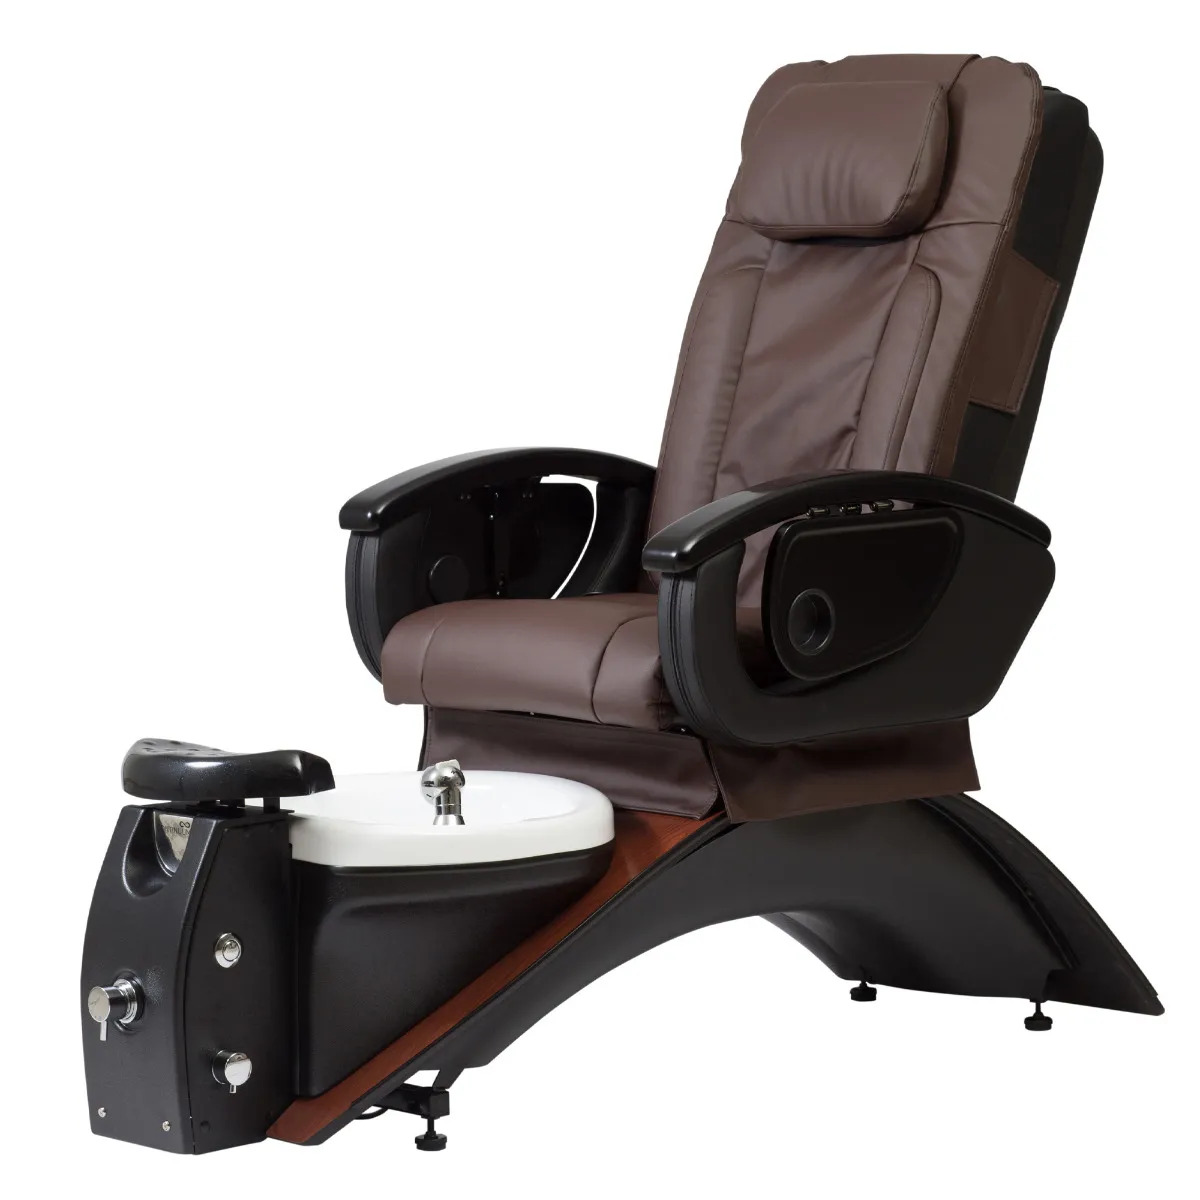 Taking a Close Look at Pedicure Chairs by Continuum – Part 2